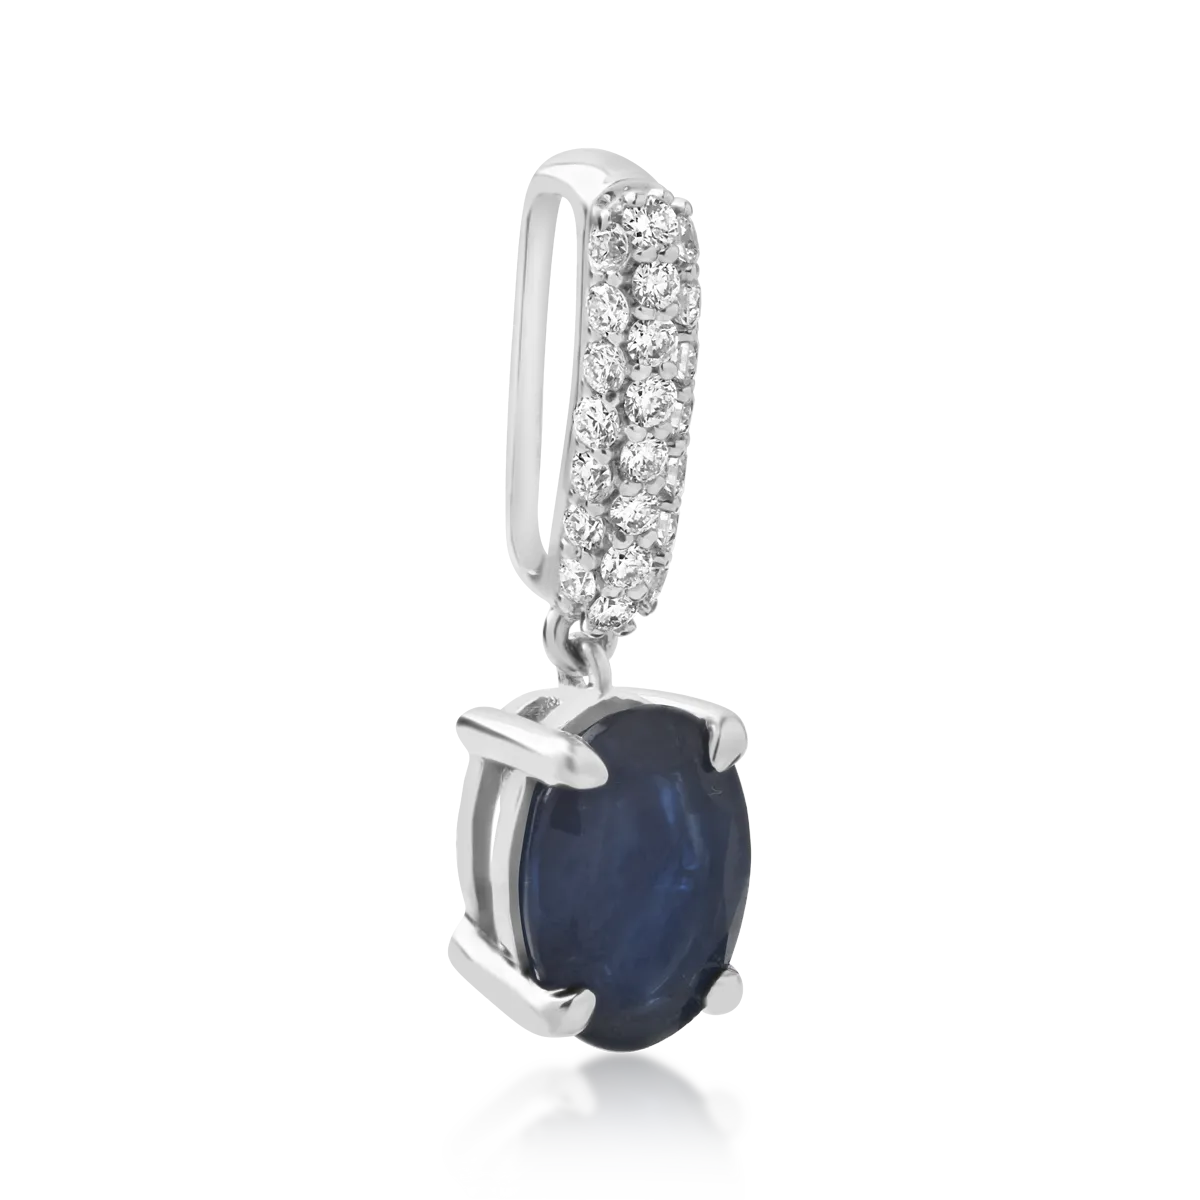 18K white gold pendant with sapphire of 0.925ct and diamonds of 0.11ct